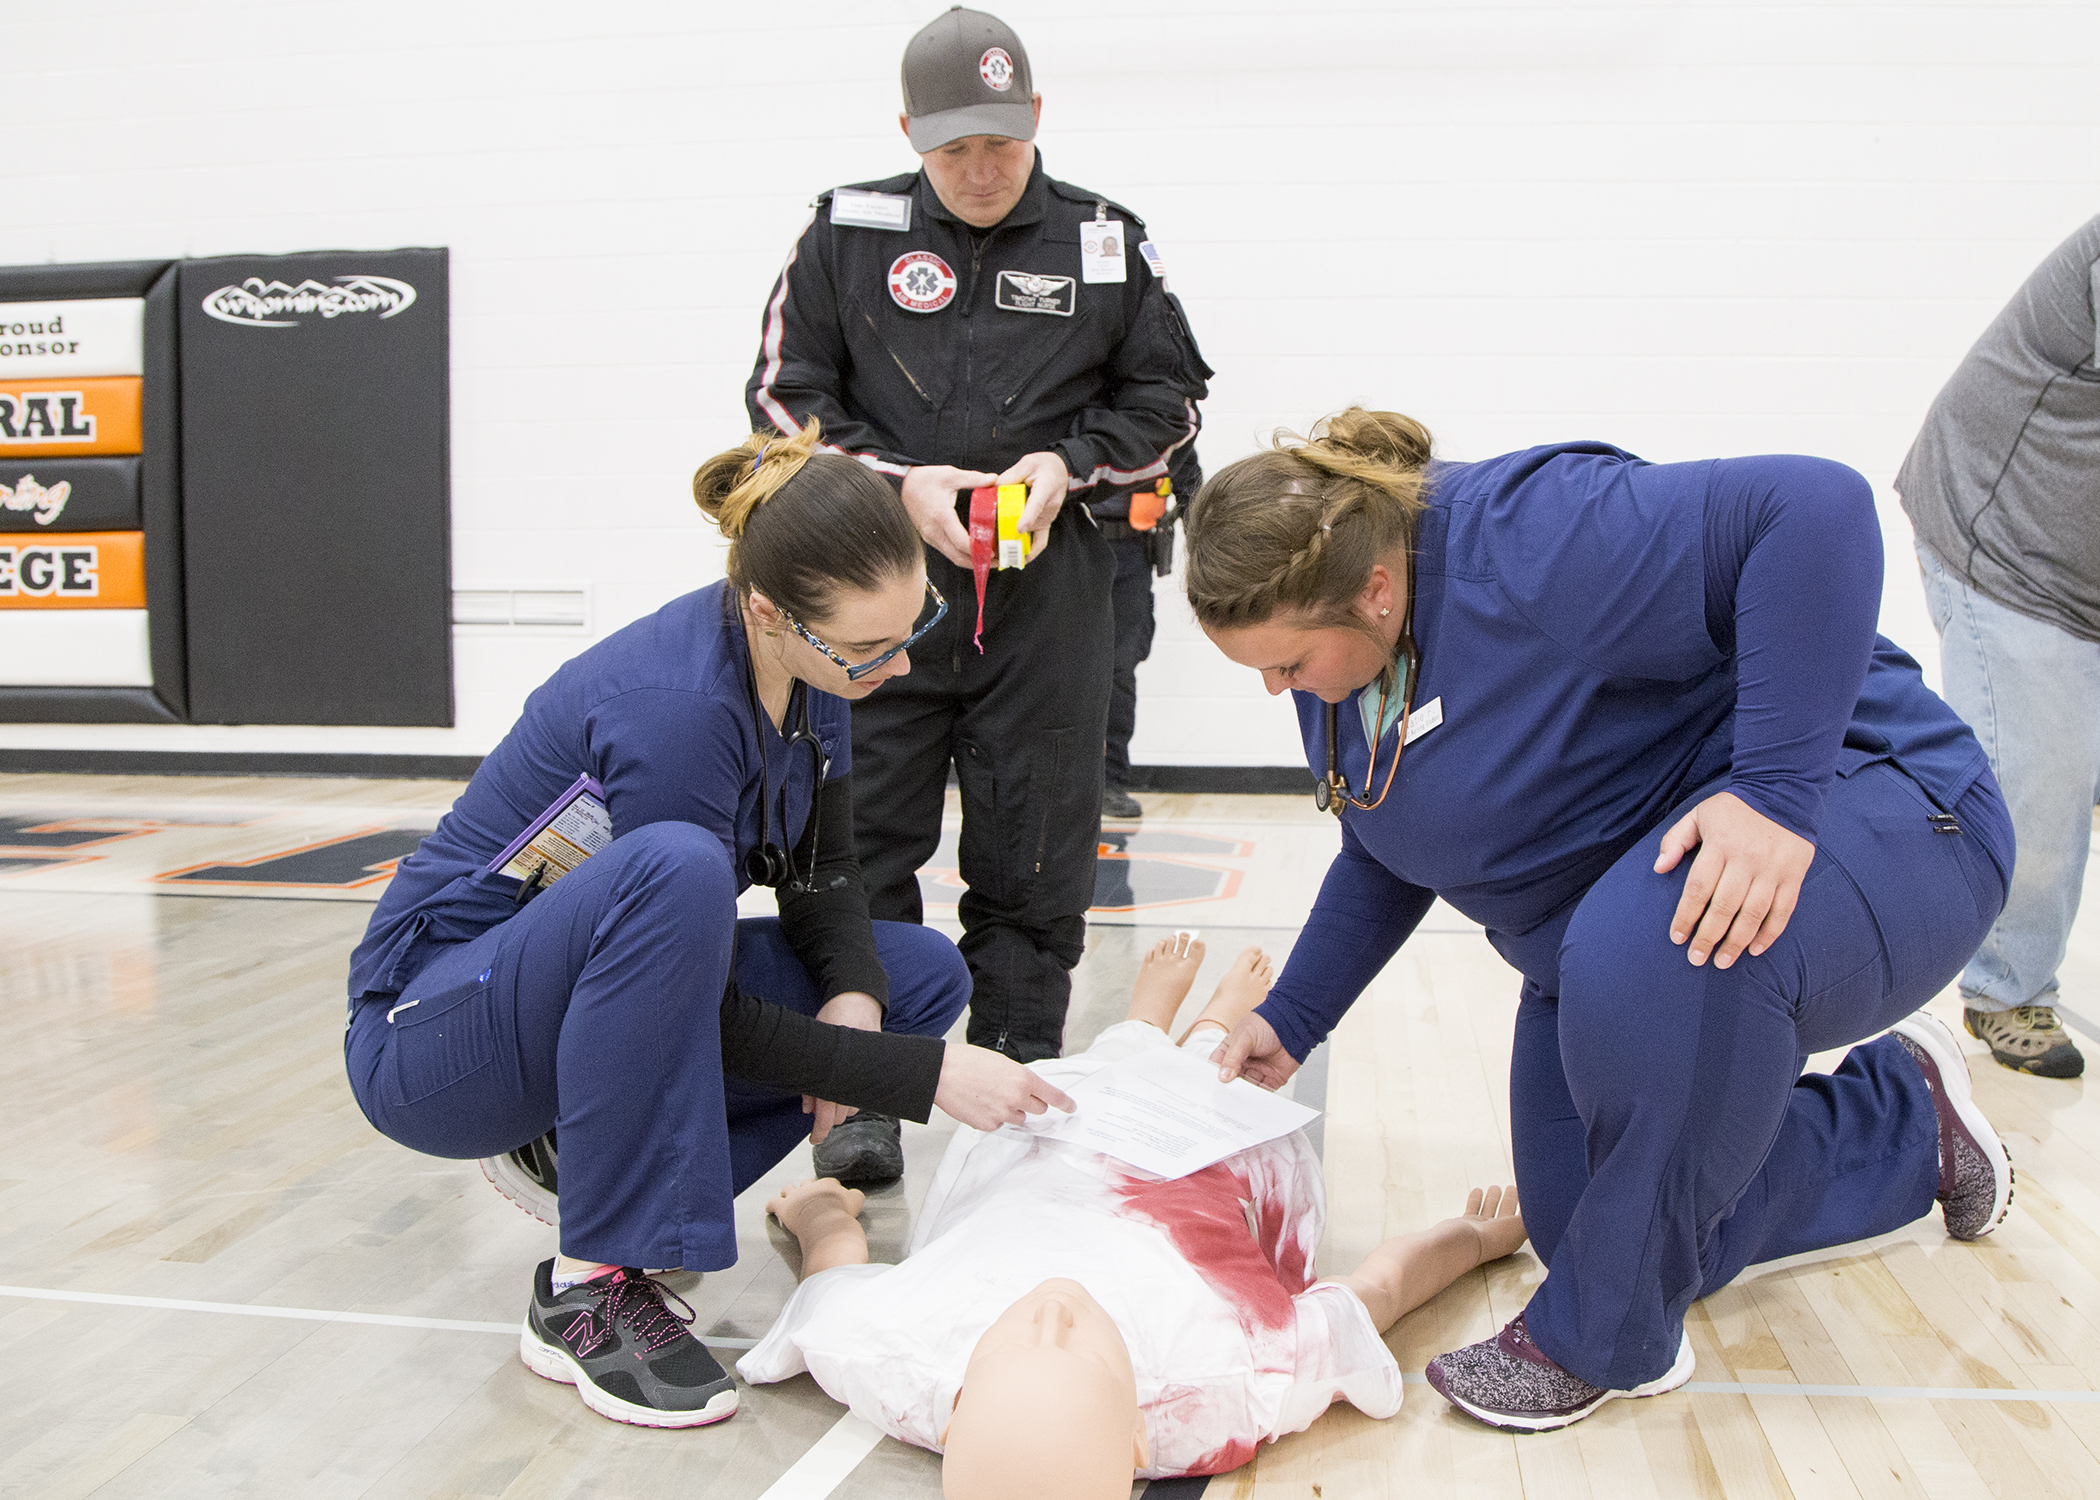 two nursing students look at a dummy for fake injuries while a flight for life medic assesses their work